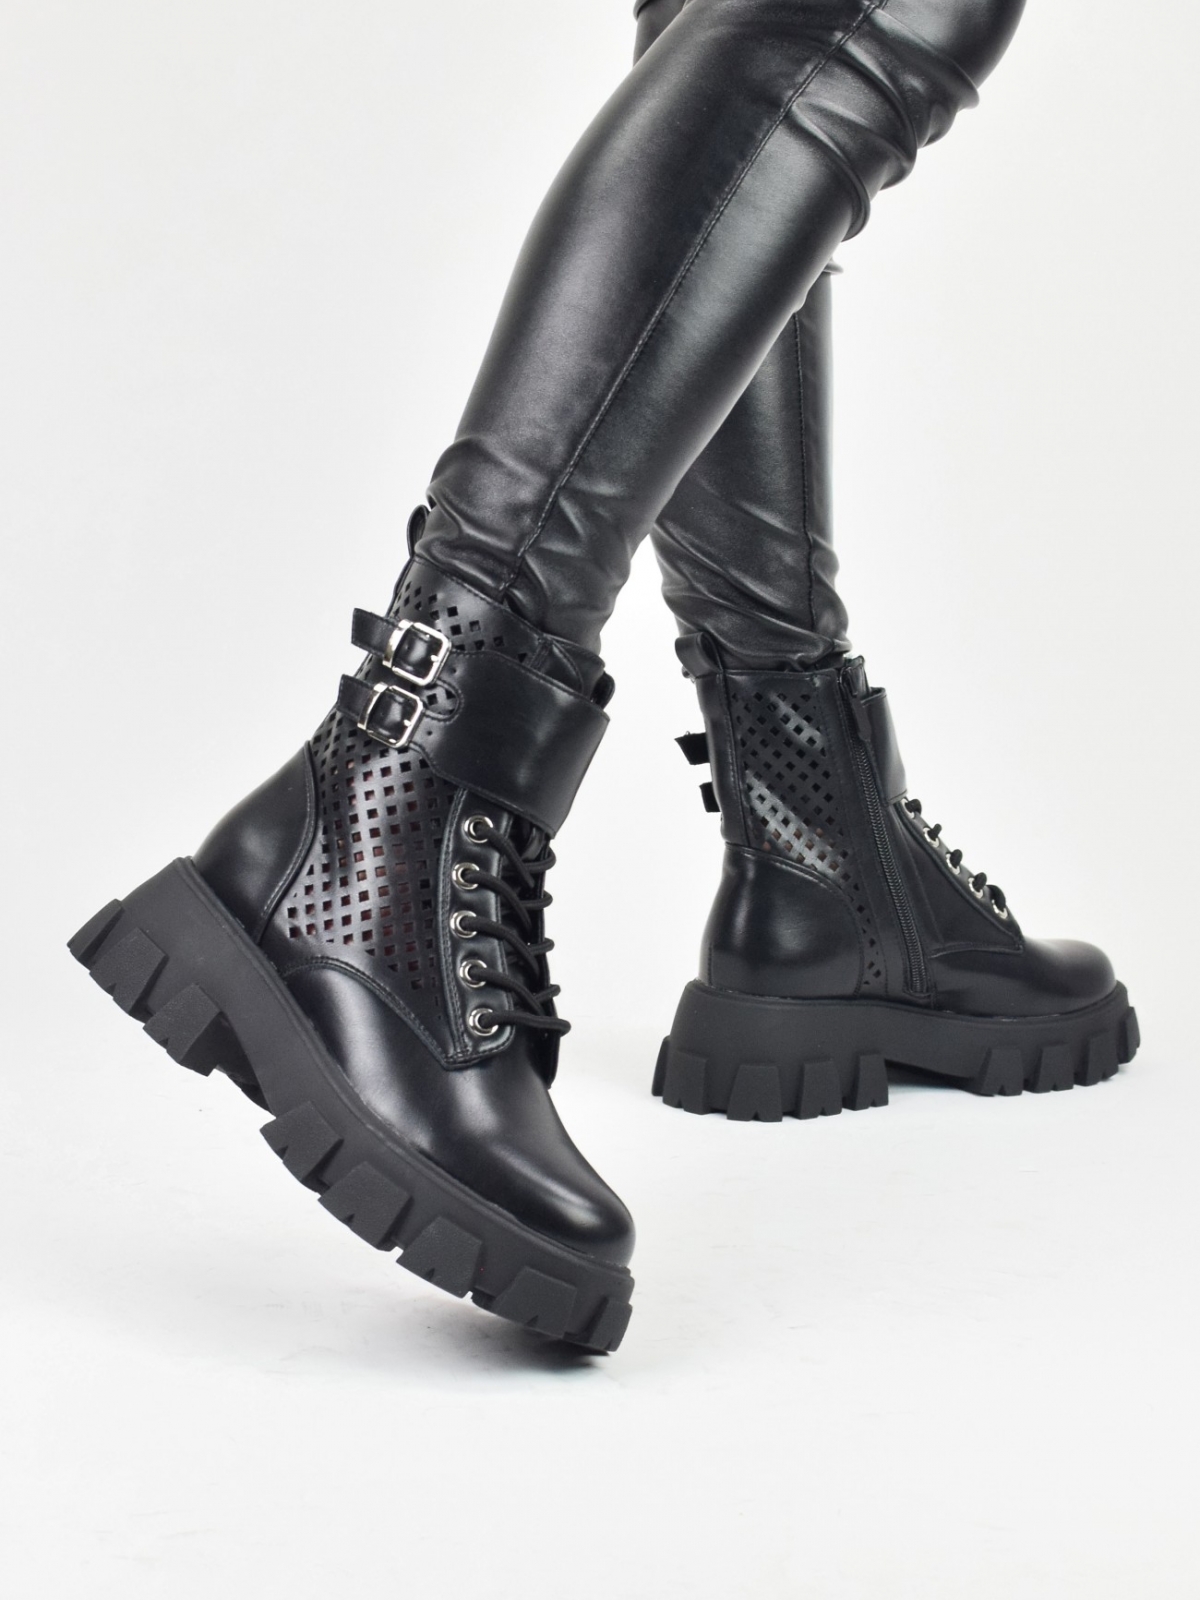 Women's ankle boots with straps in black